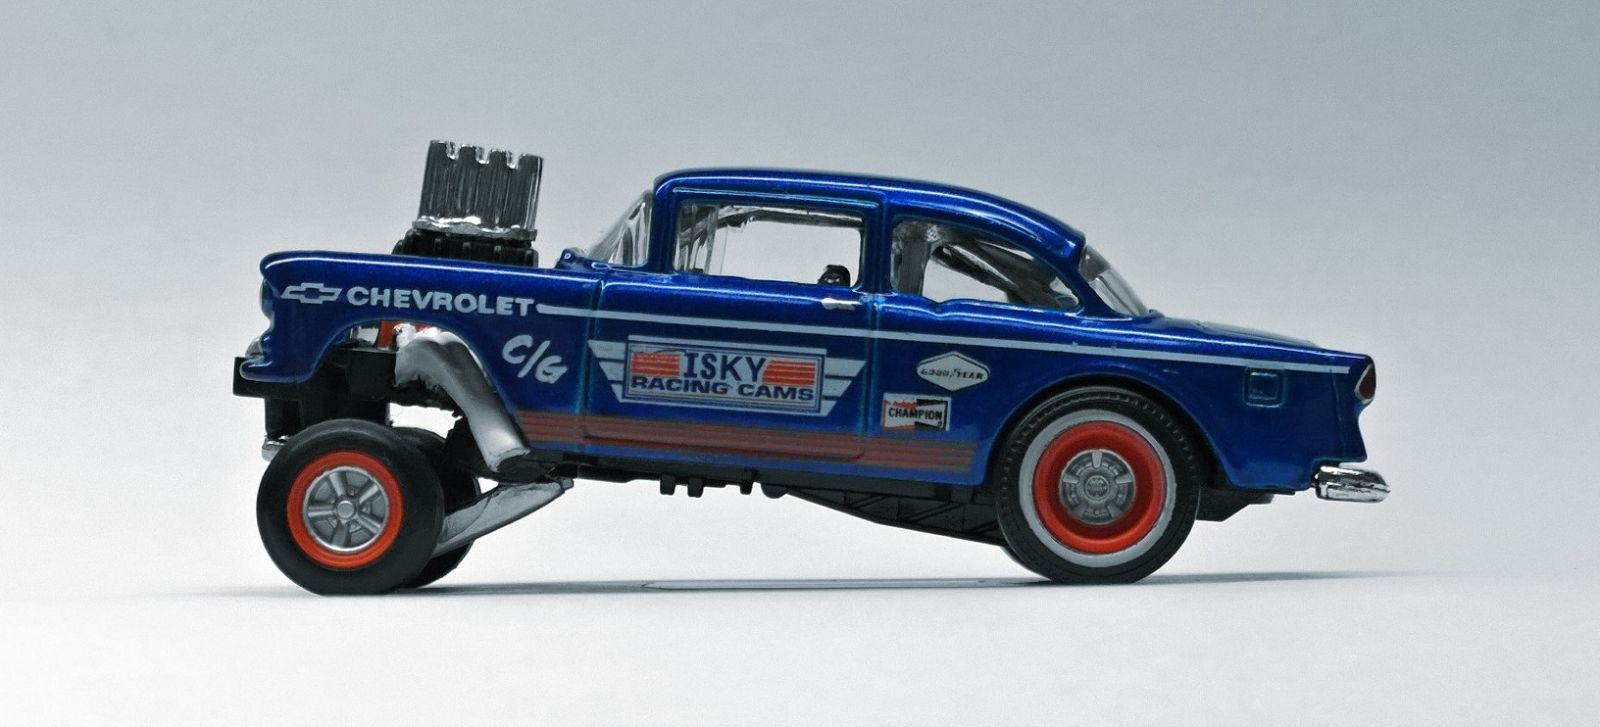 Illustration for article titled CUSTOM! 55 Chevy Gasser mash up part 2! Lots of pics and how-to